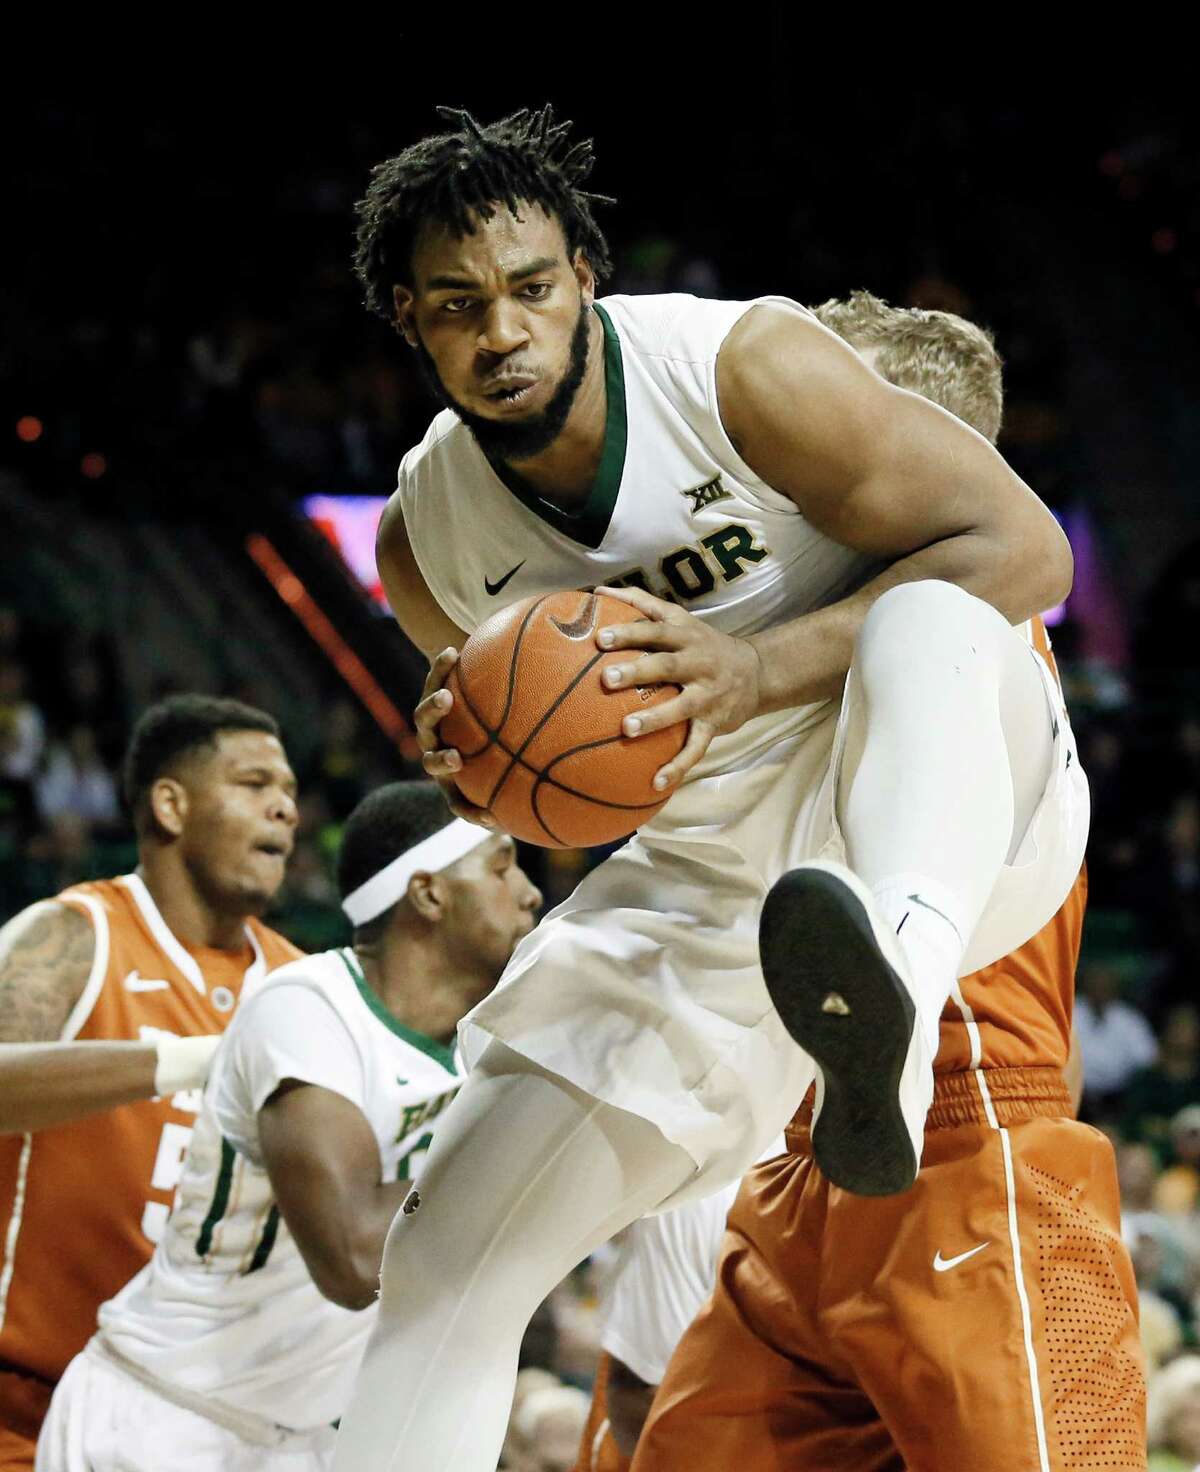 Baylor forward Rico Gathers (2) comes down with one of his 11 first-half rebounds in an NCAA college basketball game against Texas, Saturday, Jan. 31, 2015, in Waco, Texas. (AP Photo/Tony Gutierrez)